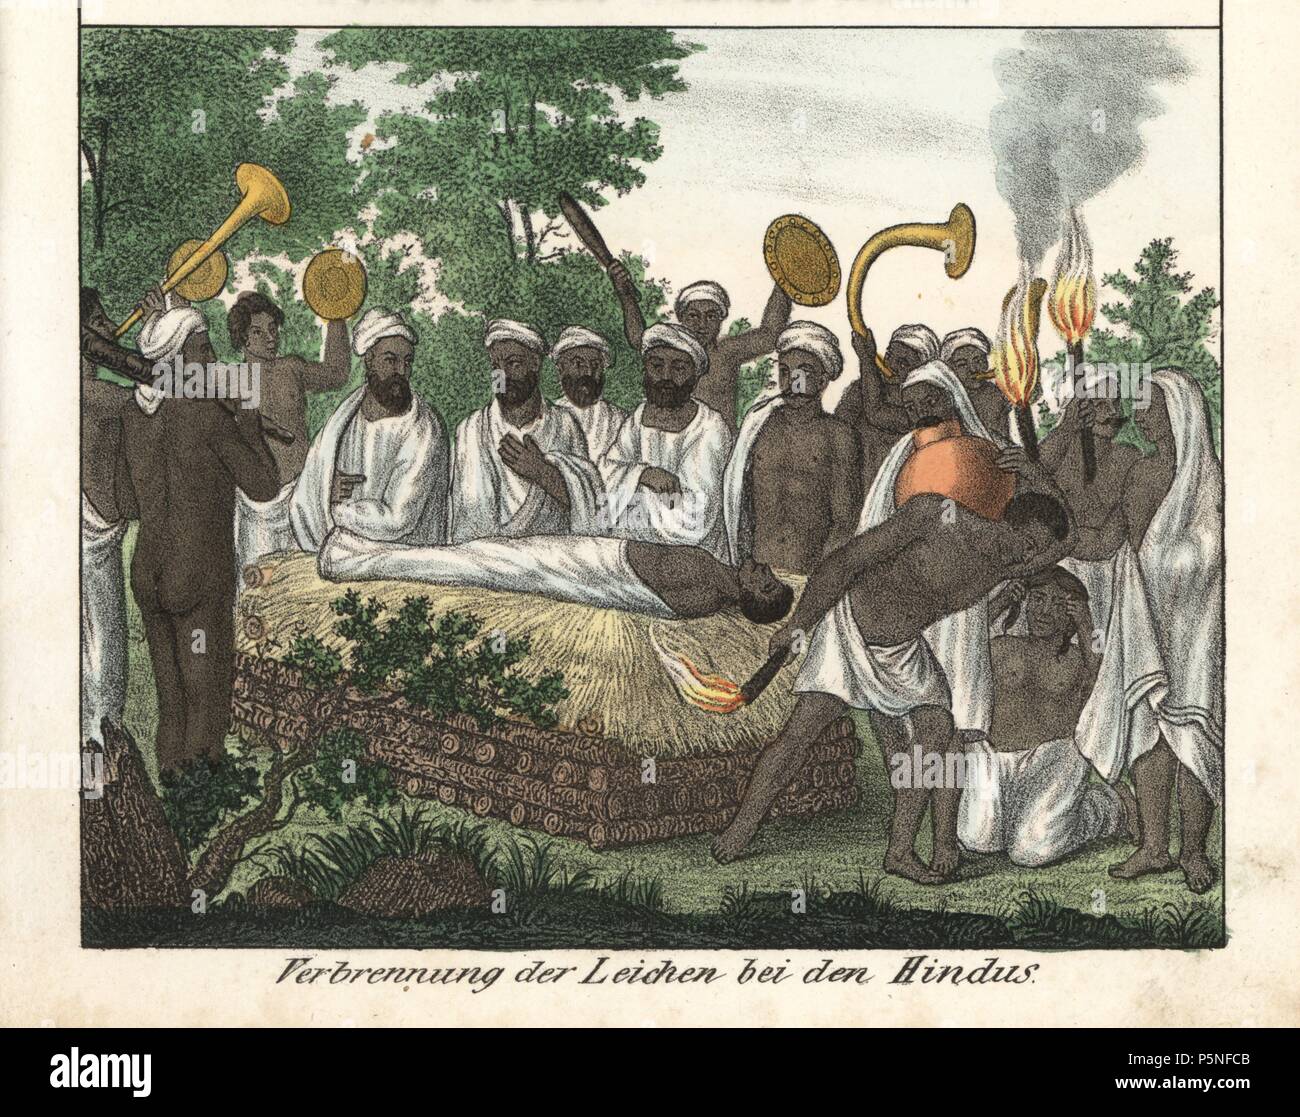 Hindu funeral ceremony with body on a bier about to be cremated, surrounded by mourners and musicians with horns and cymbals. Handcoloured lithograph from Friedrich Wilhelm Goedsche's 'Vollstaendige Völkergallerie in getreuen Abbildungen' (Complete Gallery of Peoples in True Pictures), Meissen, circa 1835-1840. Goedsche (1785-1863) was a German writer, bookseller and publisher in Meissen. Many of the illustrations were adapted from Bertuch's 'Bilderbuch fur Kinder' and others. Stock Photo